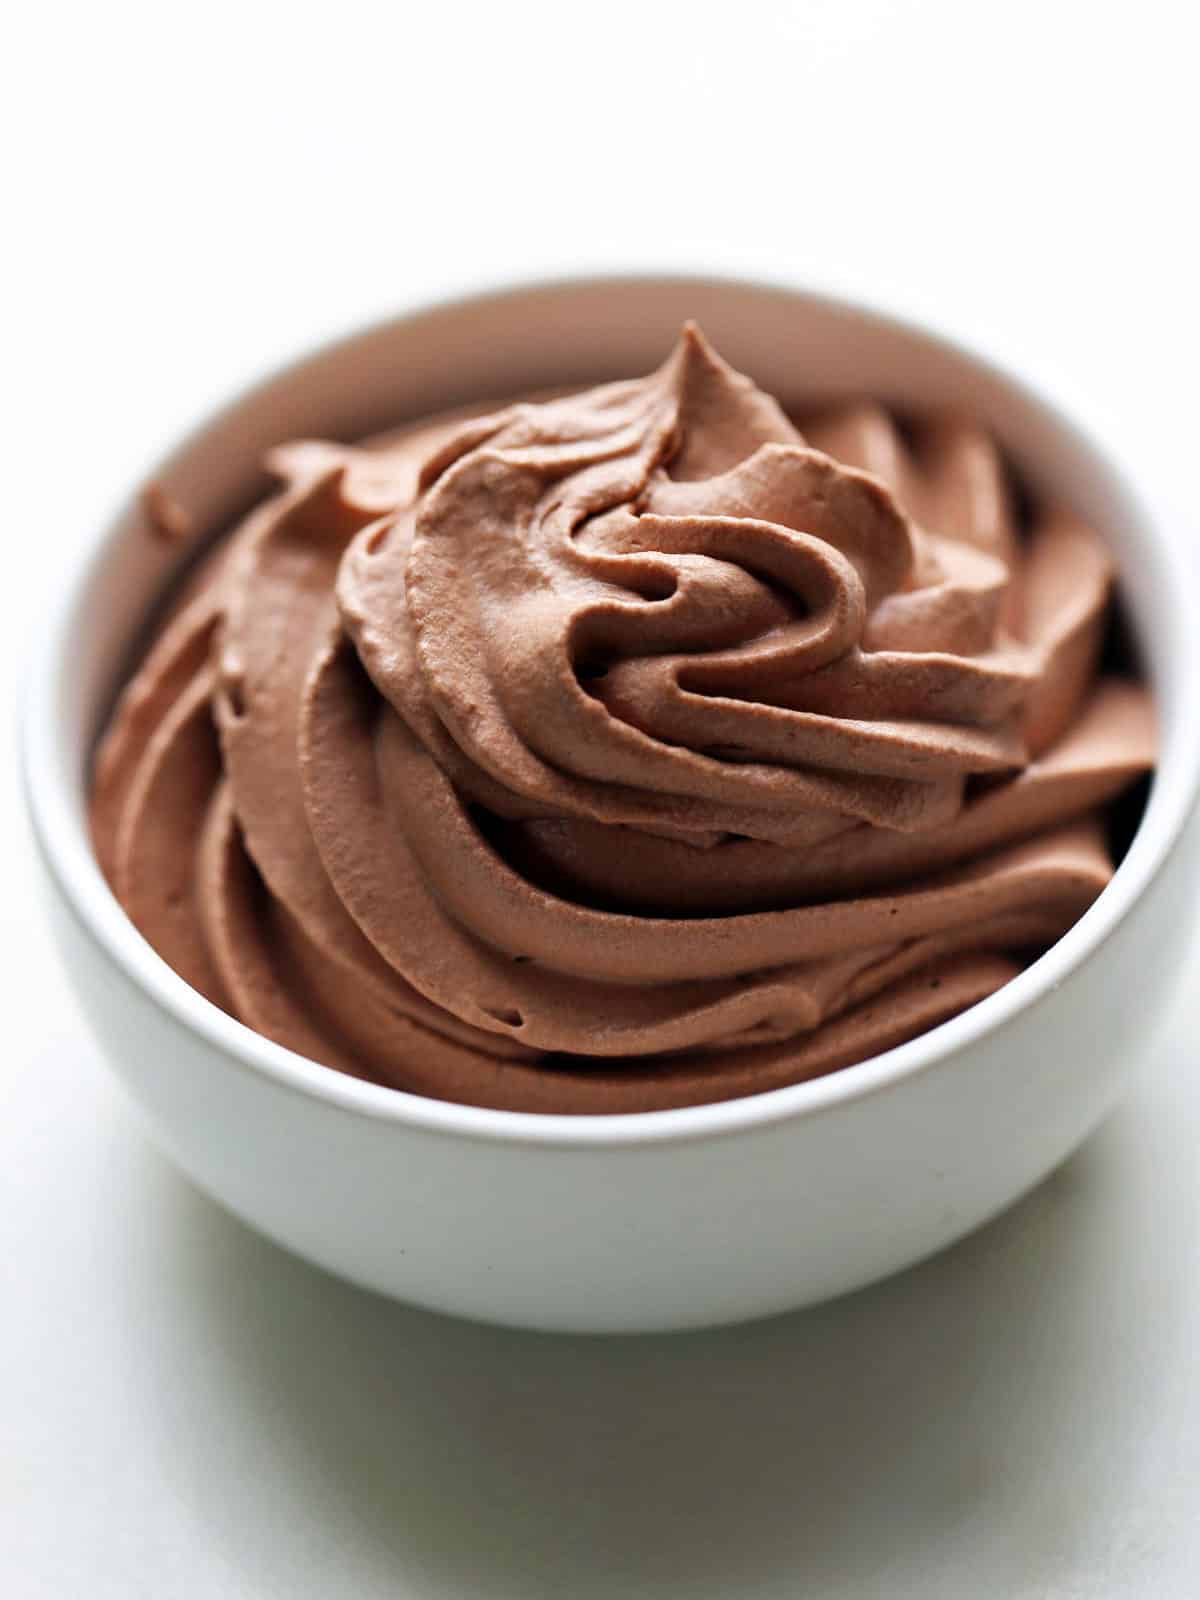 Keto chocolate whipped cream is served in a white bowl. 